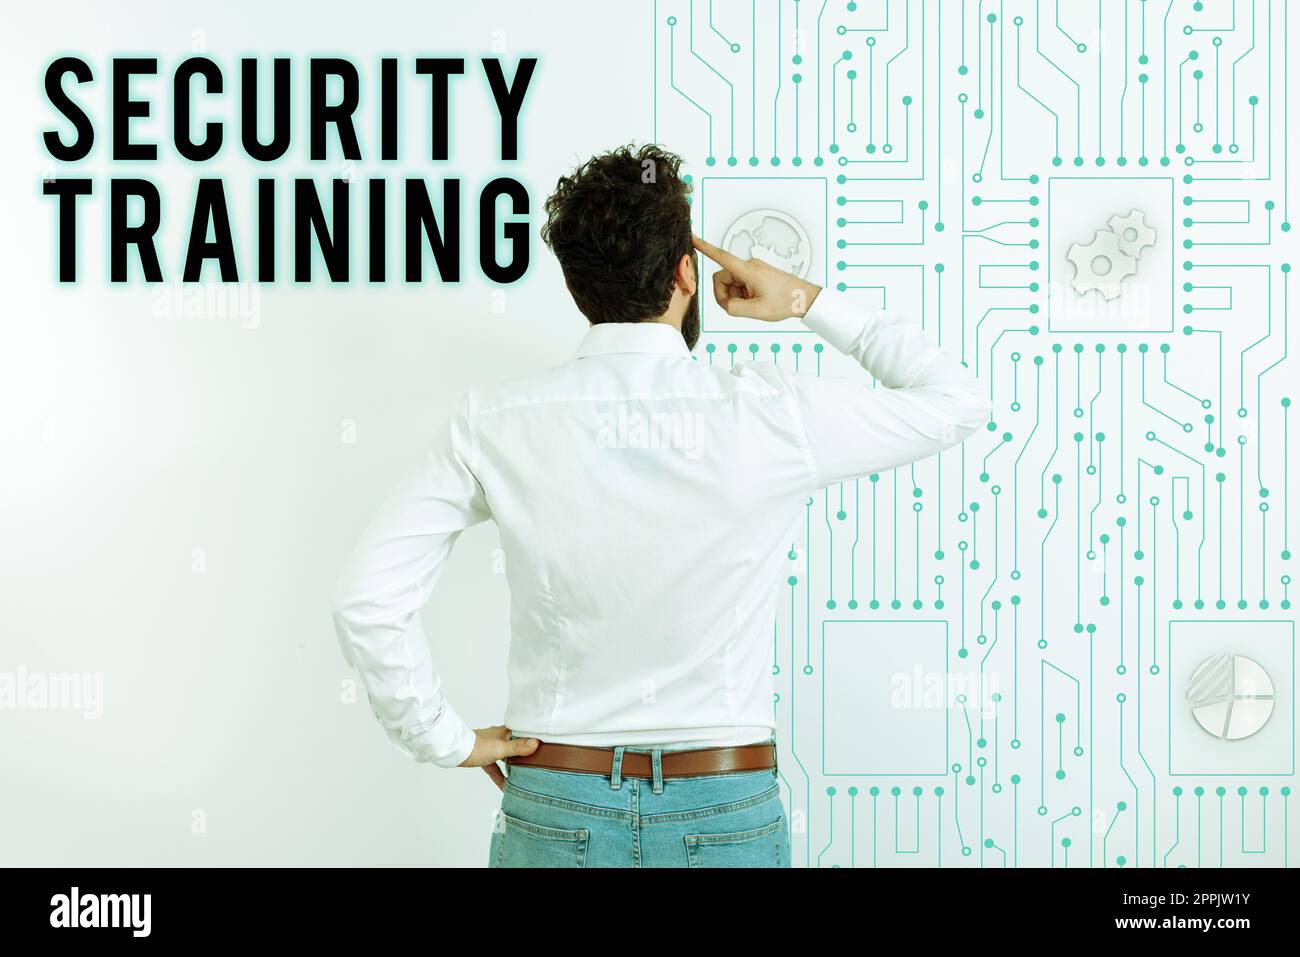 Text caption presenting Security Training. Business approach providing security awareness training for end users Stock Photo